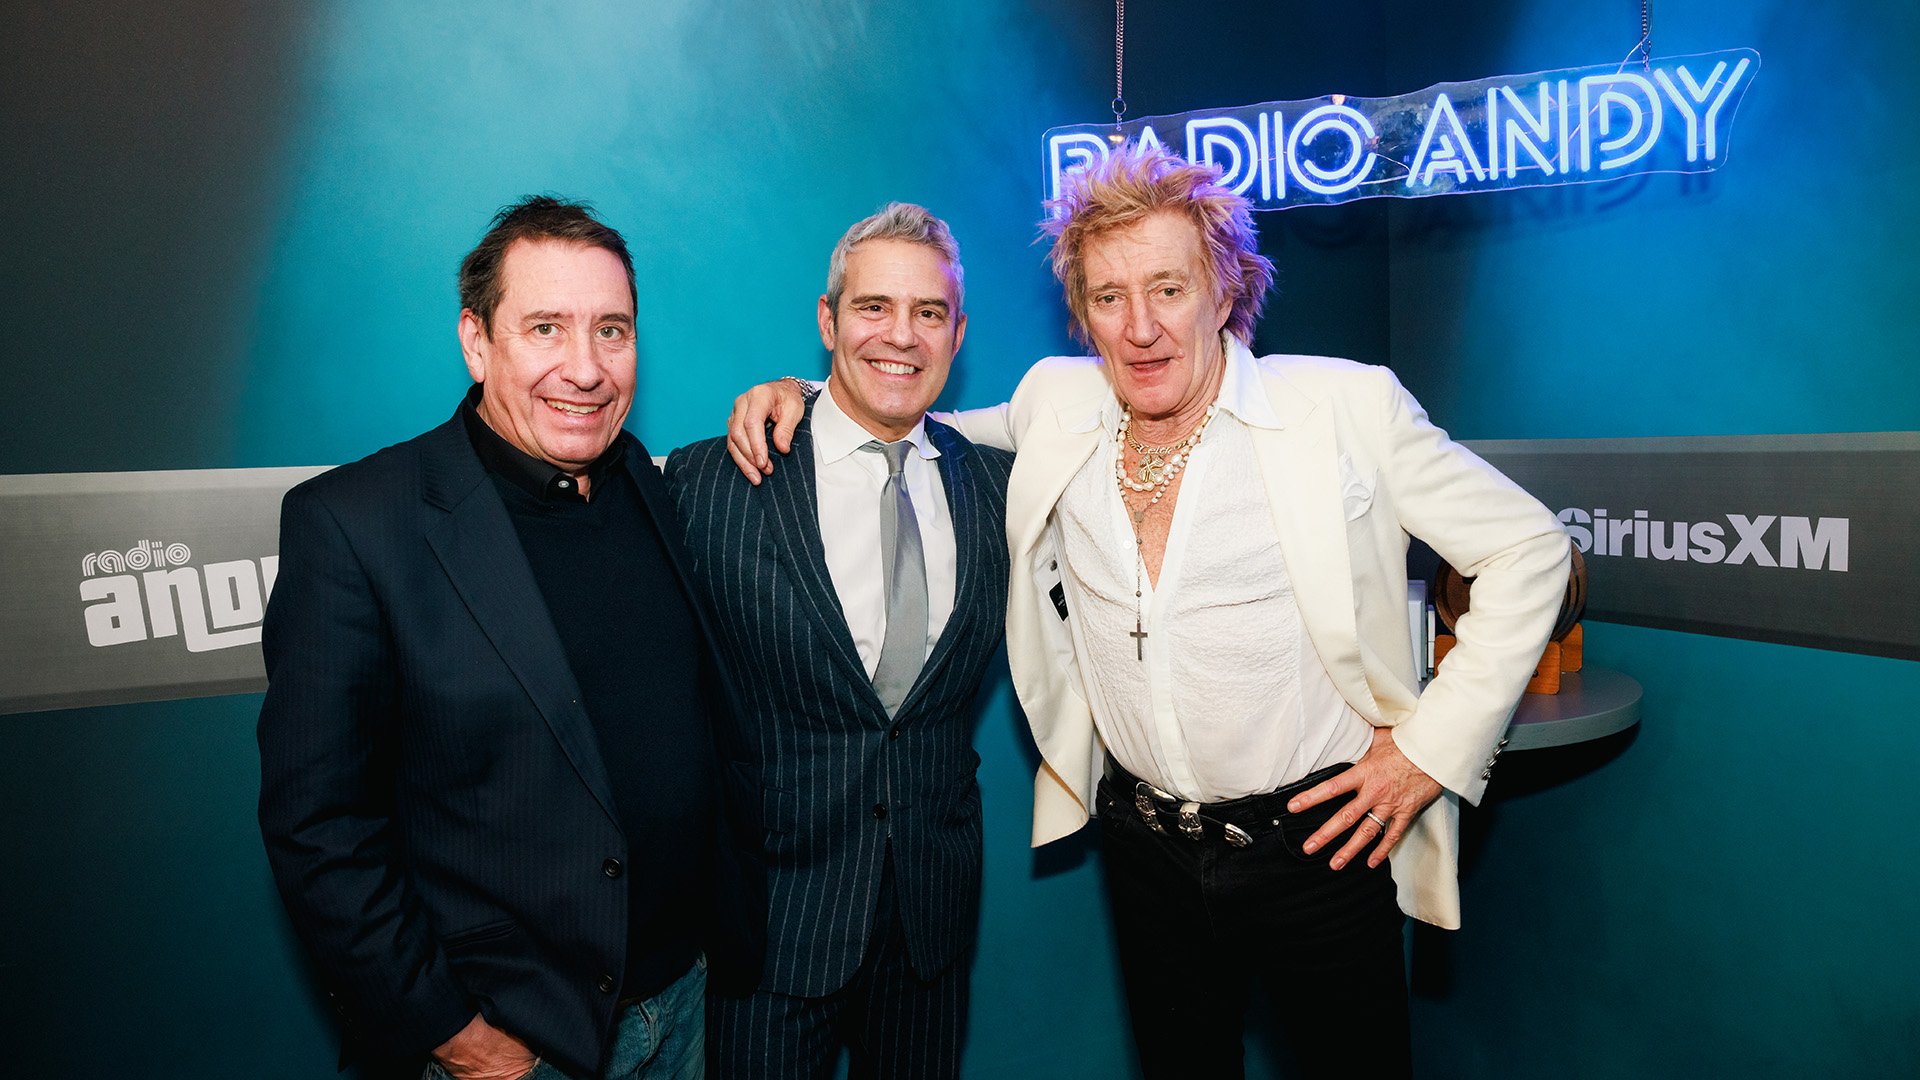 Andy Cohen, Jools Holland, and Rod Stewart on SiriusXM's Radio Andy